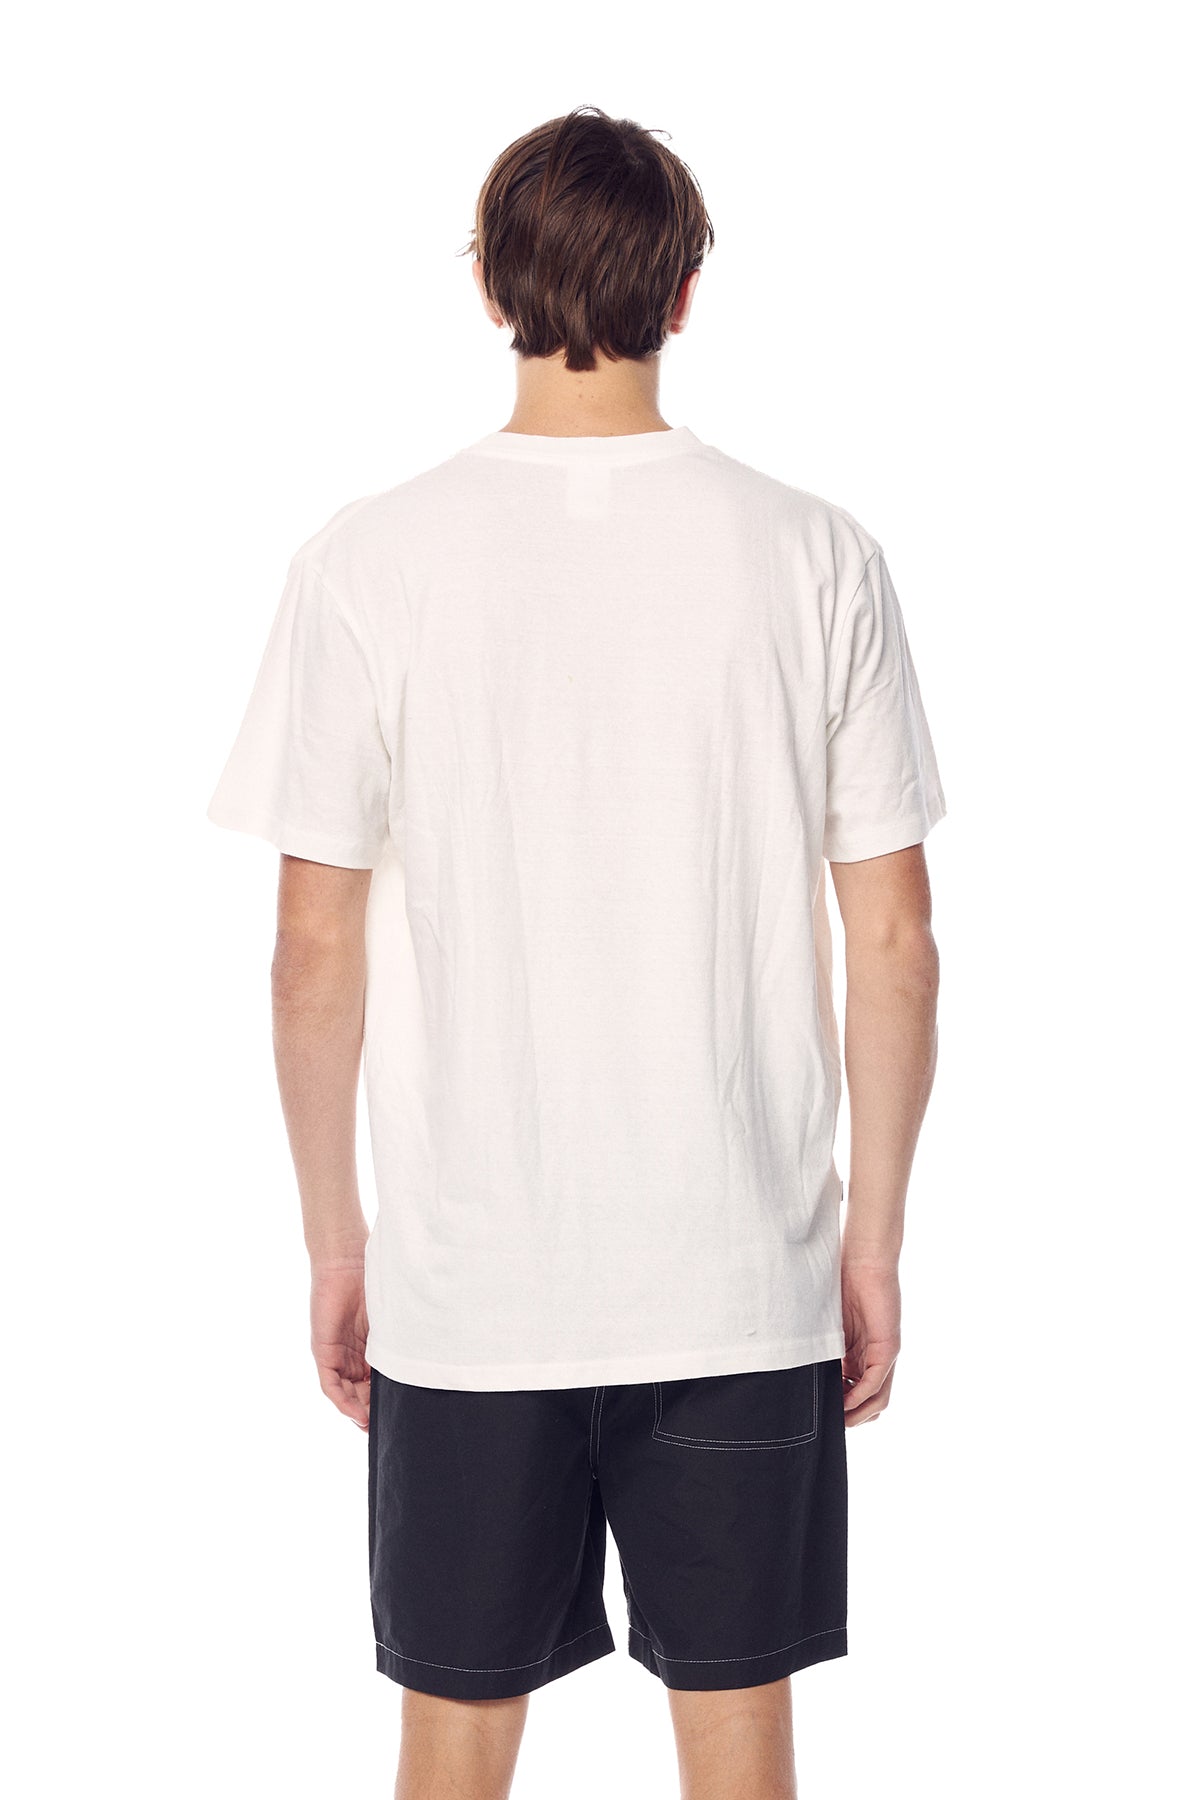 NUCLEAR FORT 50/50 REG SS TEE - WASHED WHITE